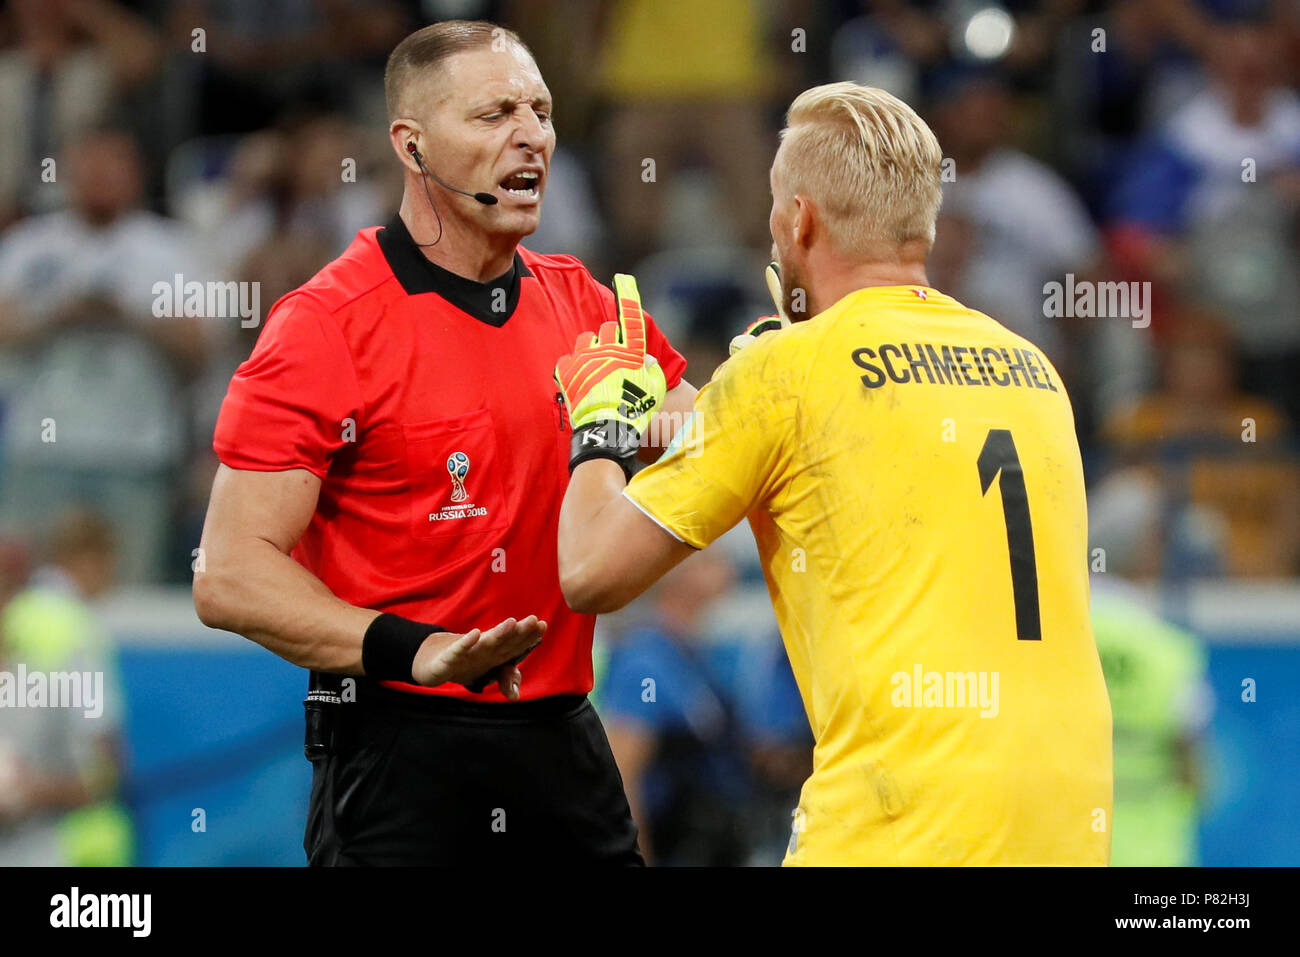 NIZHNY NOVGOROD, RUSSIA - JULY 1: Kasper Schmeichel (R) of Denmark national team argues with the referee Nestor Pitana during the 2018 FIFA World Cup Russia Round of 16 match between Croatia and Denmark at Nizhny Novgorod Stadium on July 1, 2018 in Nizhny Novgorod, Russia. MB Media Stock Photo